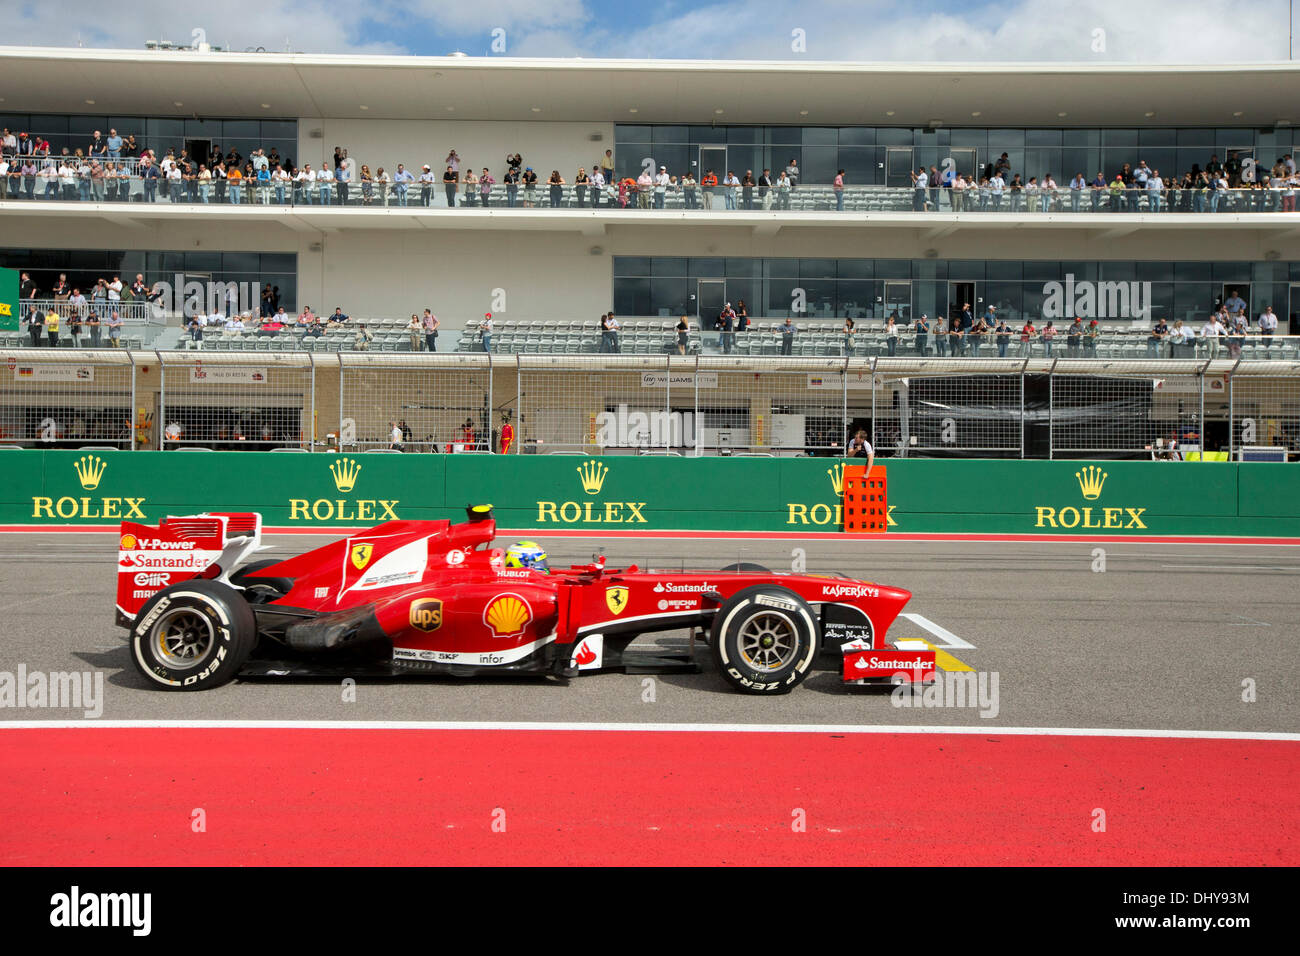 F1 race car driver Fernando Alonso of Scuderia Ferrari on the main straightaway during qualifying for the United States Grand Prix at the 3.2 mile Circuit of the Americas track outside Austin Texas. Alonso qualified for the race, held the following day. Stock Photo